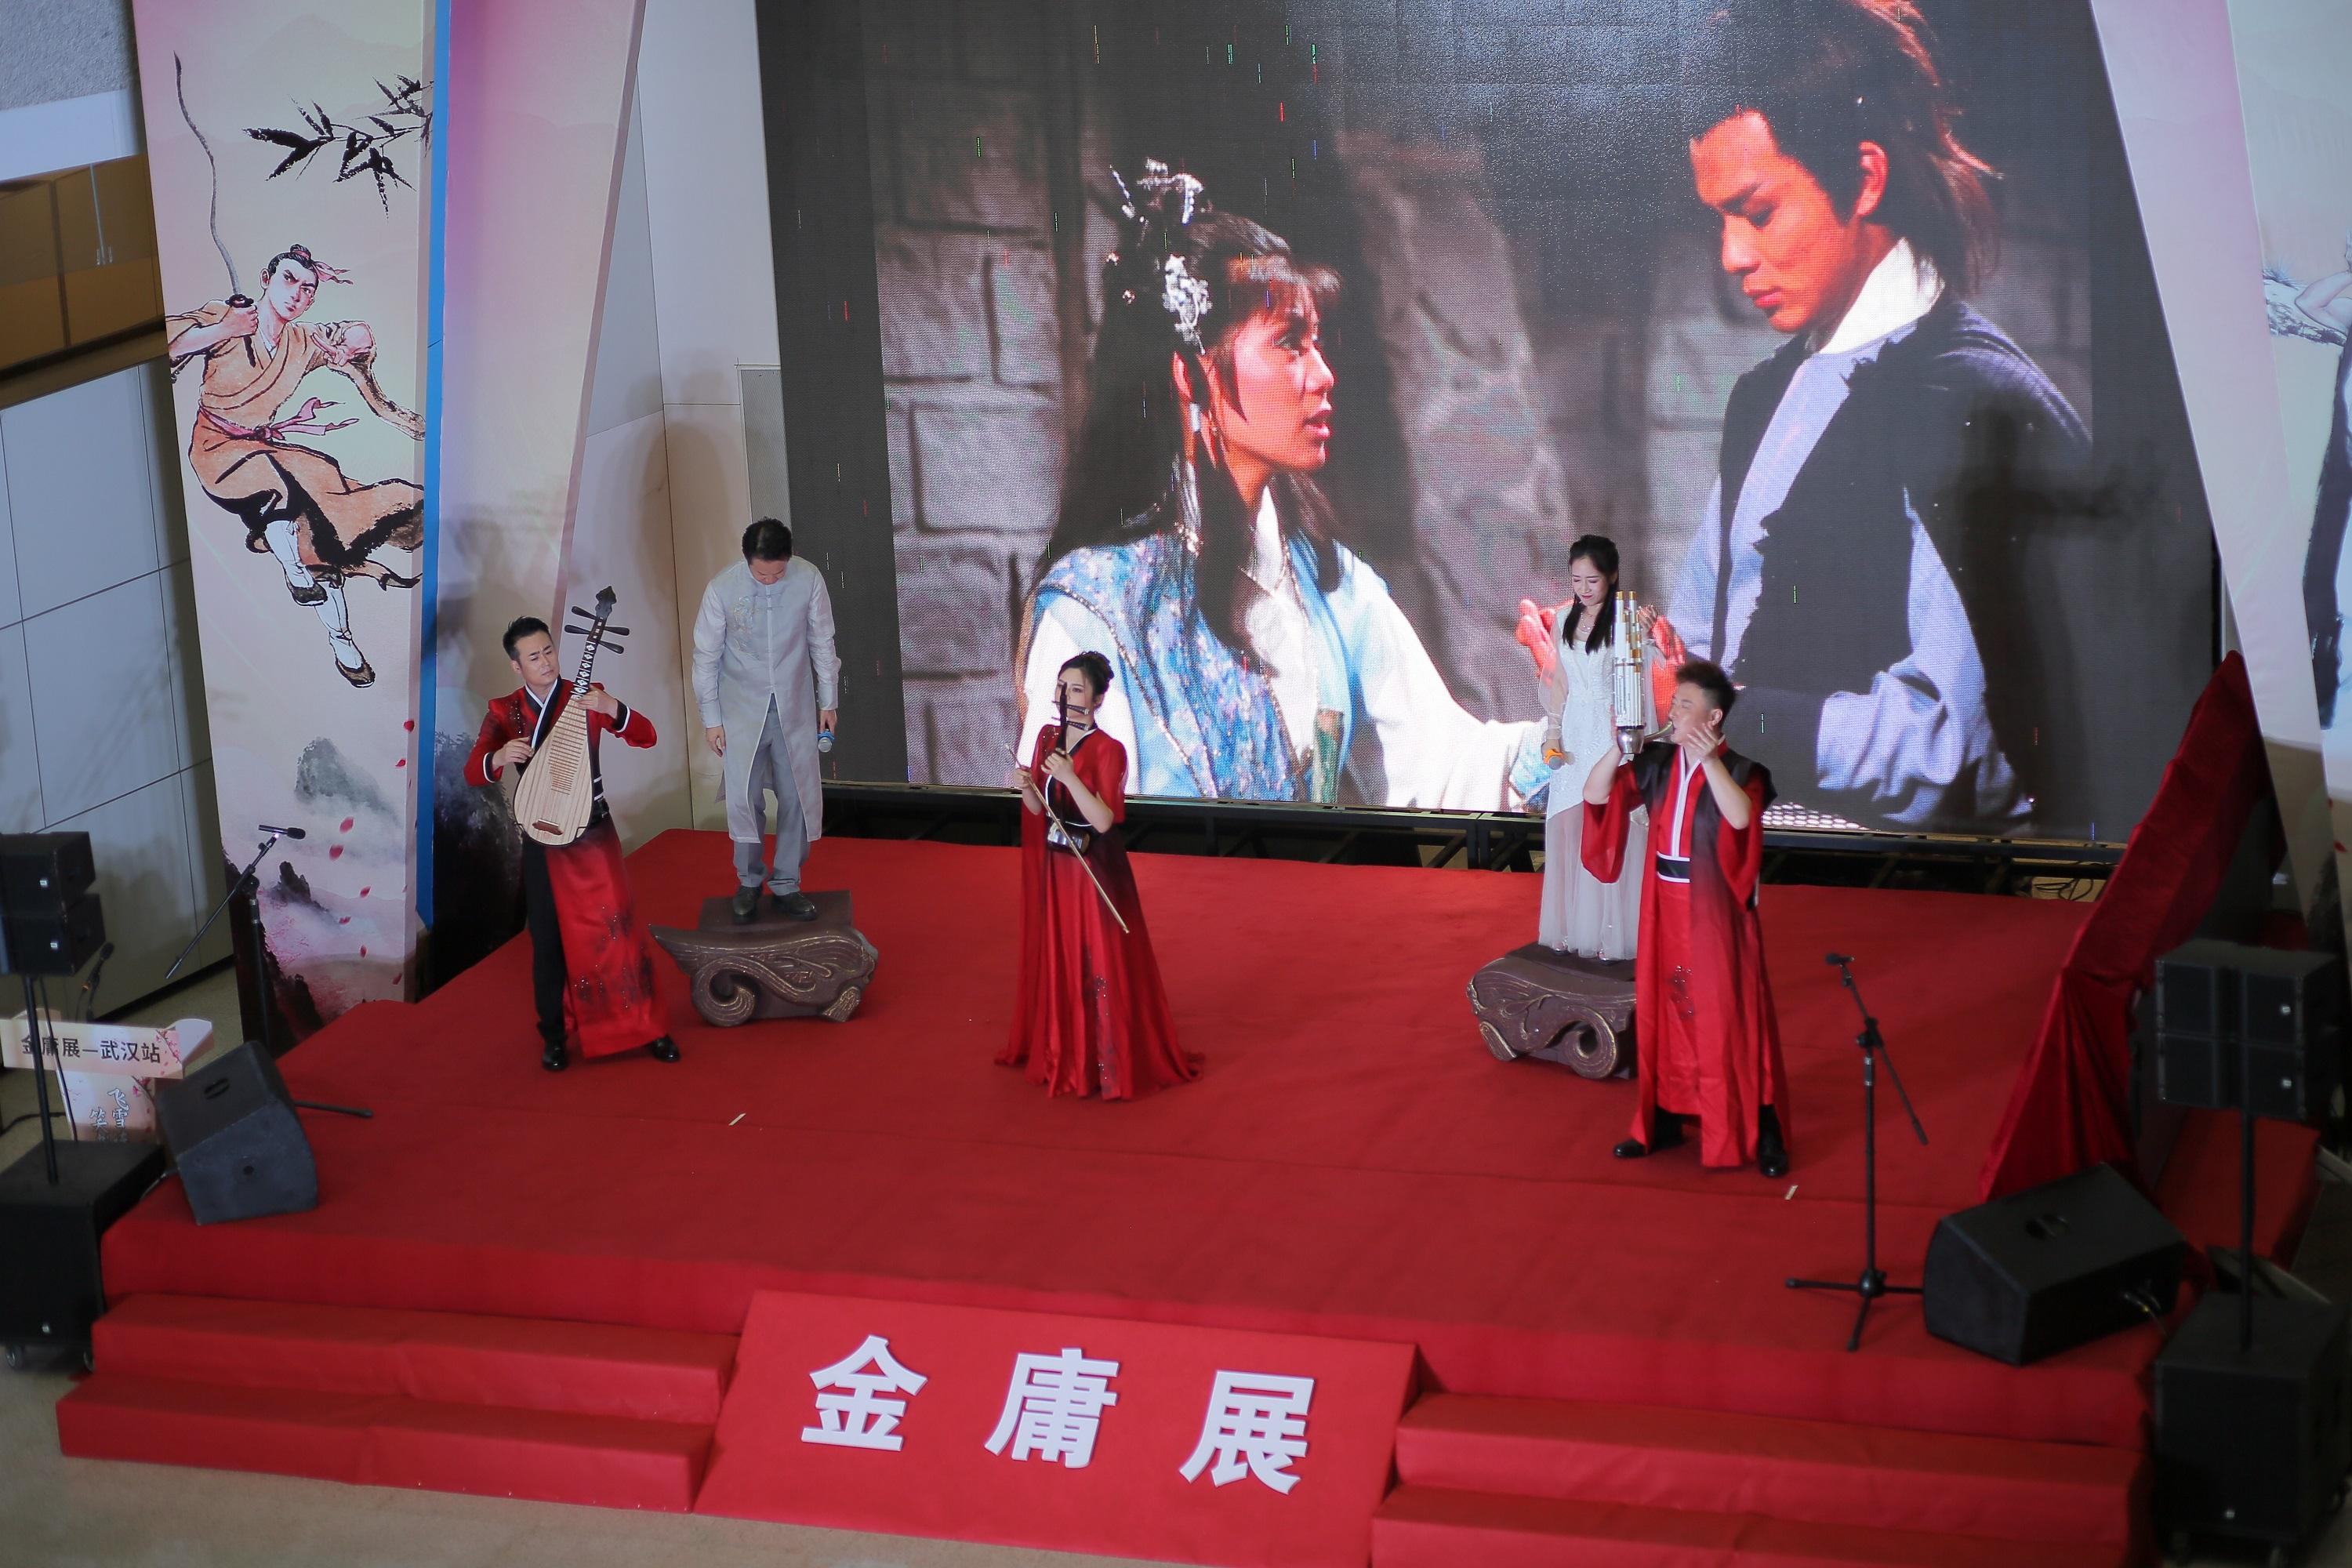 A themed exhibition on the veteran journalist and renowned writer, Dr Louis Cha (pen name Jin Yong), was officially opened today (September 9) at the Hubei Provincial Library in Wuhan. Photo shows a singing performance at opening ceremony of the Jin Yong exhibition.